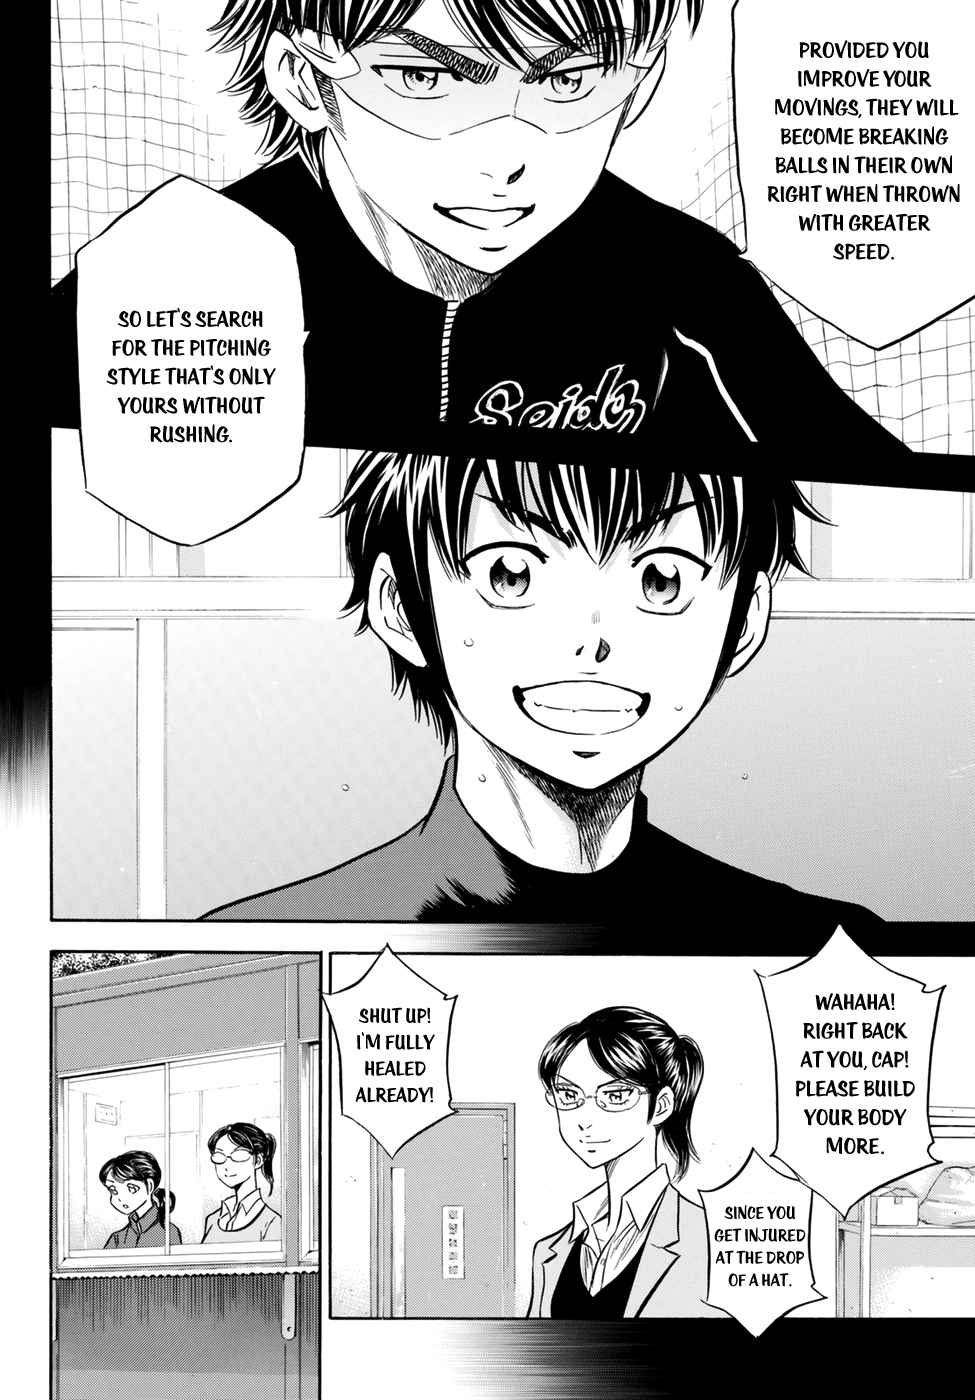 Diamond no Ace Act II Vol. 10 Ch. 84 You Have Me